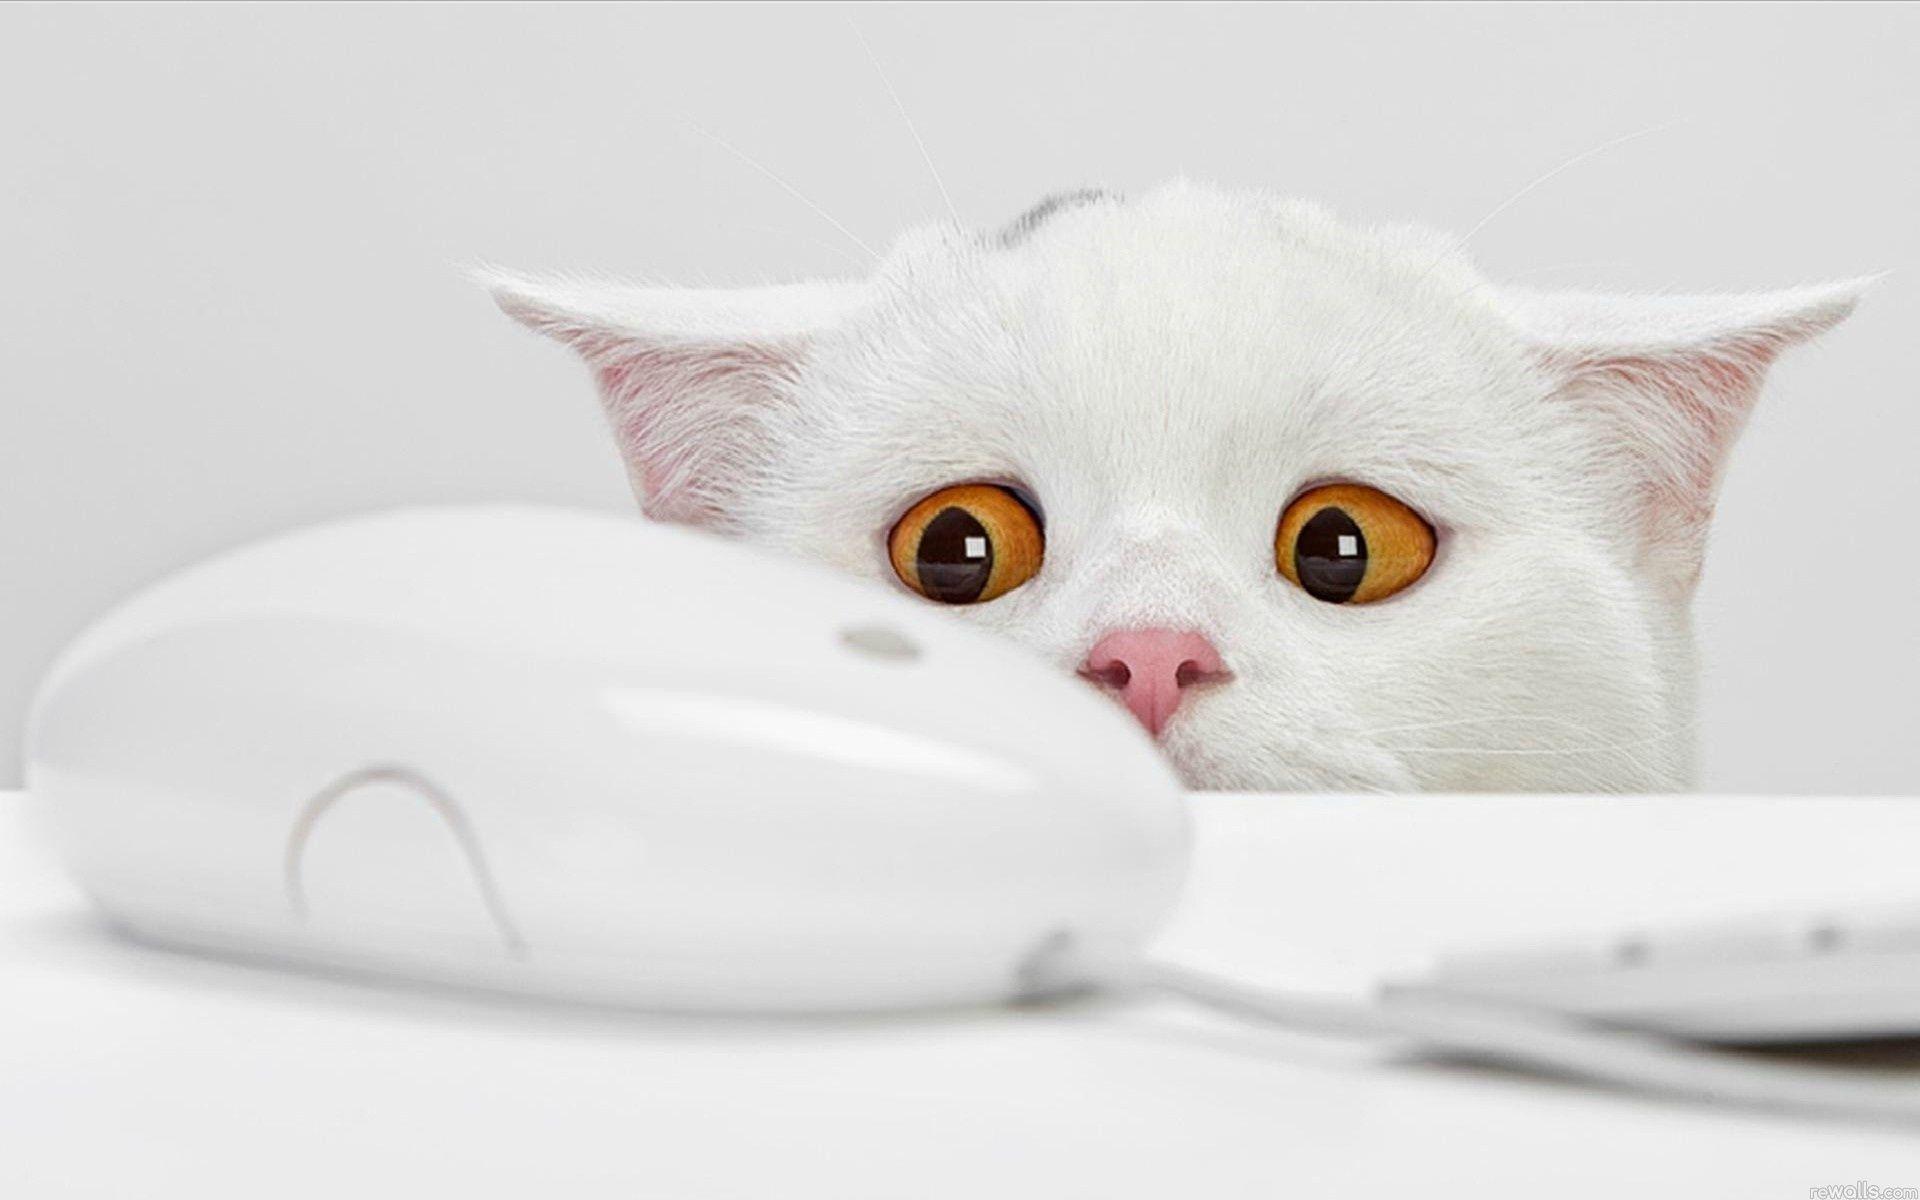 White cat scared of PC mouse wallpaper download. Wallpaper